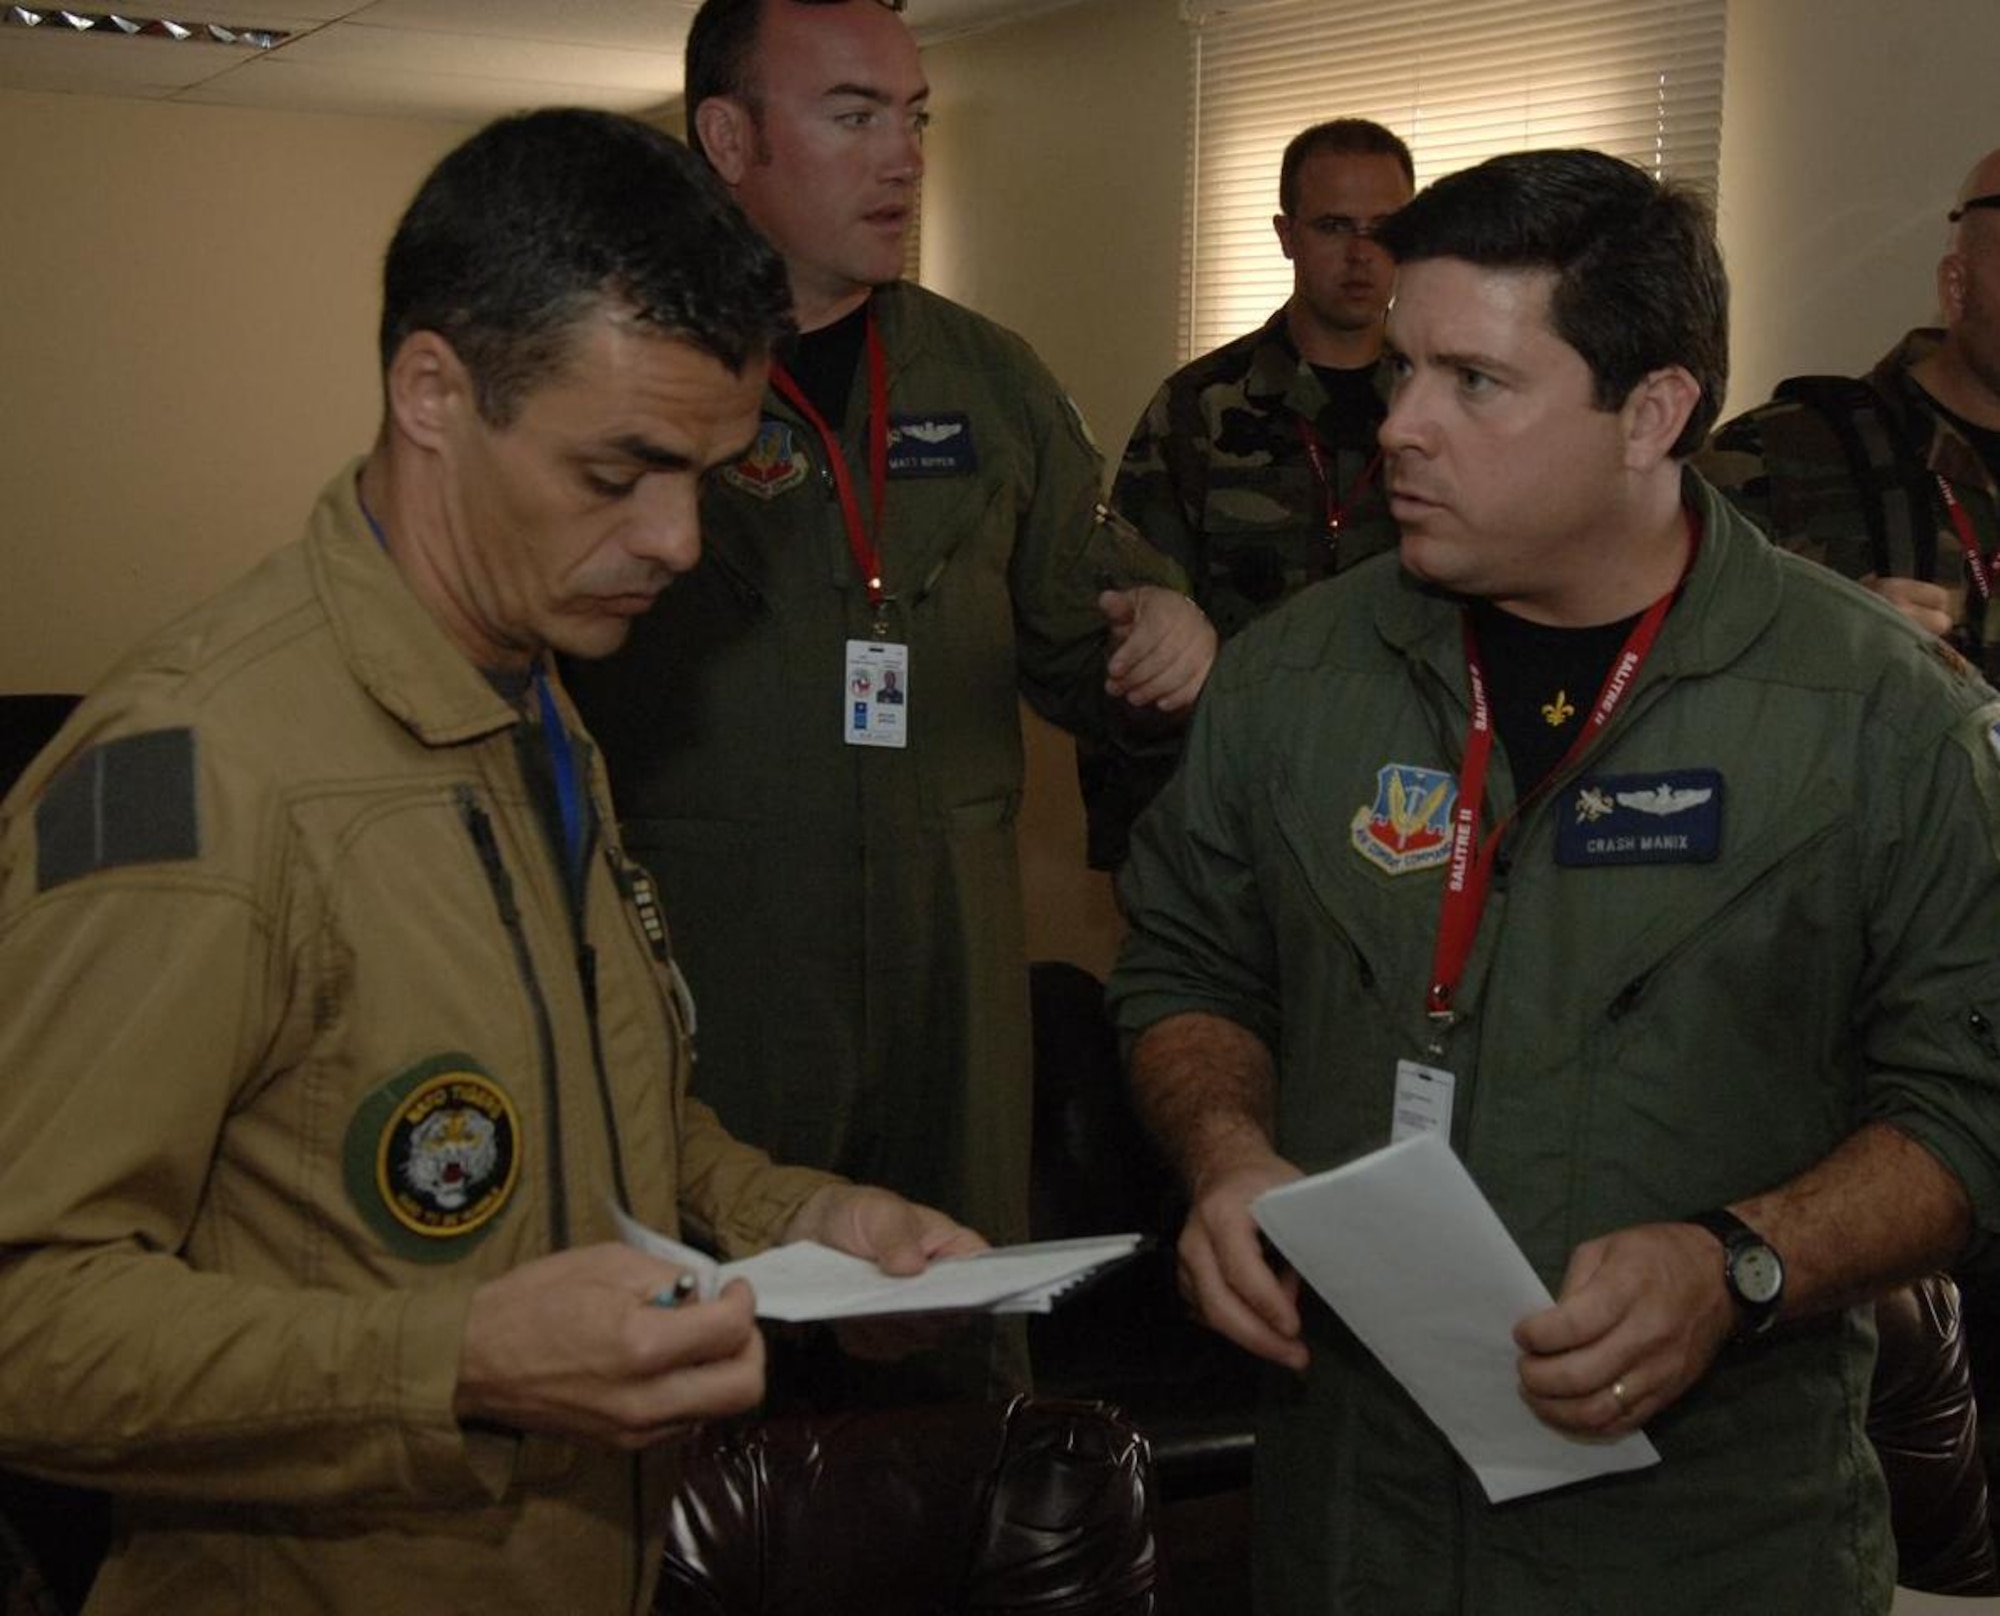 ANTOFAGASTA, Chile – Lt, Col. Michel Christophe (left), a Mirage pilot
for the French Air Force, and Maj. John Manix, an F-15 pilot with the
159th Fighter Wing, discuss a dissimilar aircraft formation during
Exercise SALITRE II hosted by Chile Oct. 23. (U.S. Air Force photo by
Tech. Sgt. Eric Petosky)